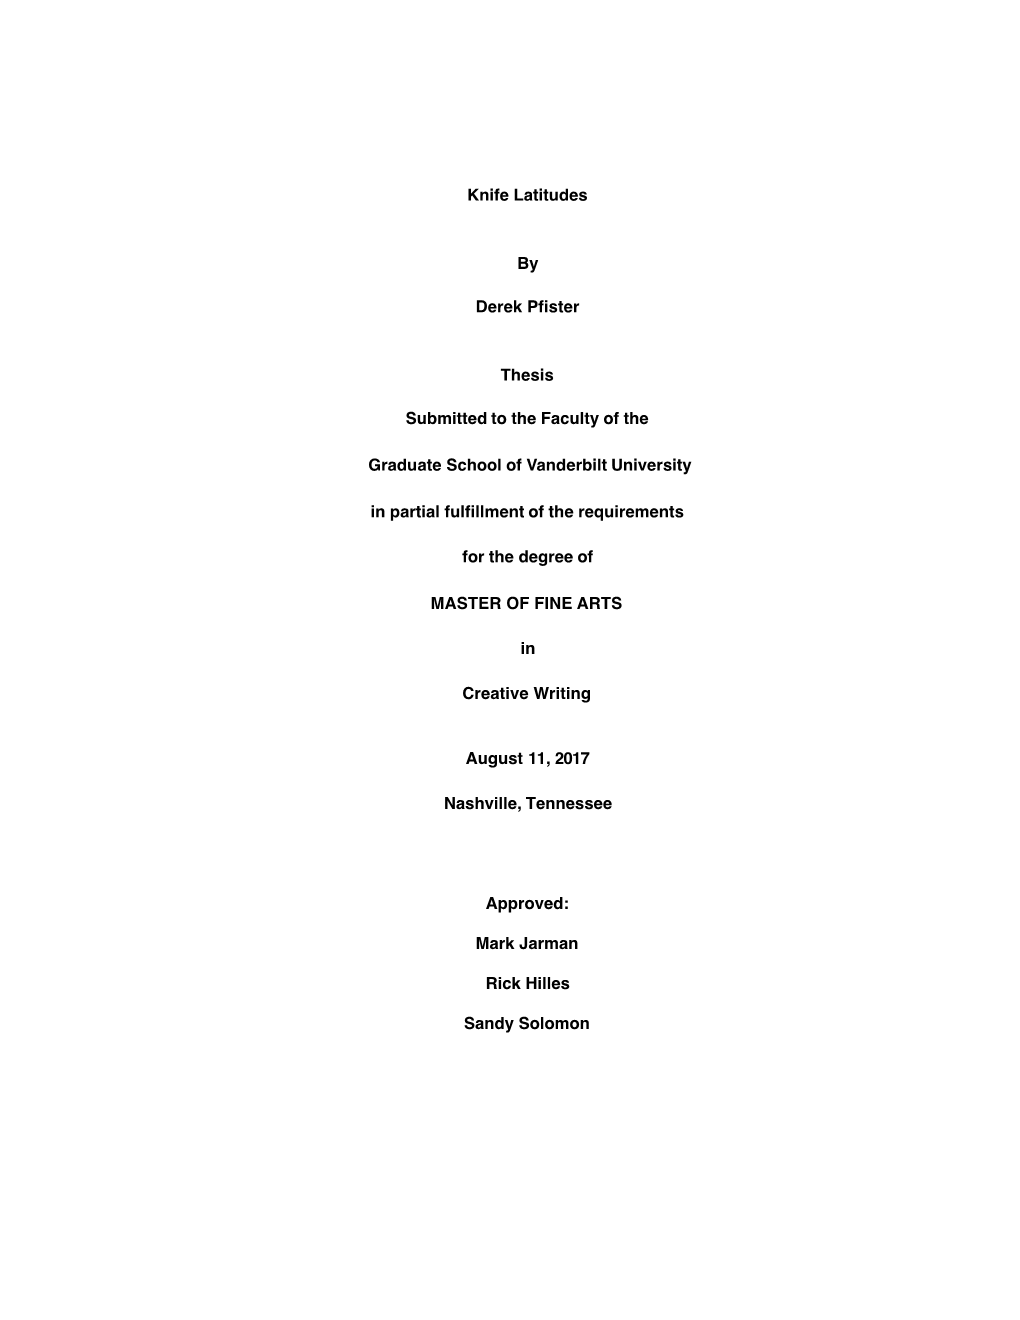 Knife Latitudes by Derek Pfister Thesis Submitted to the Faculty Of